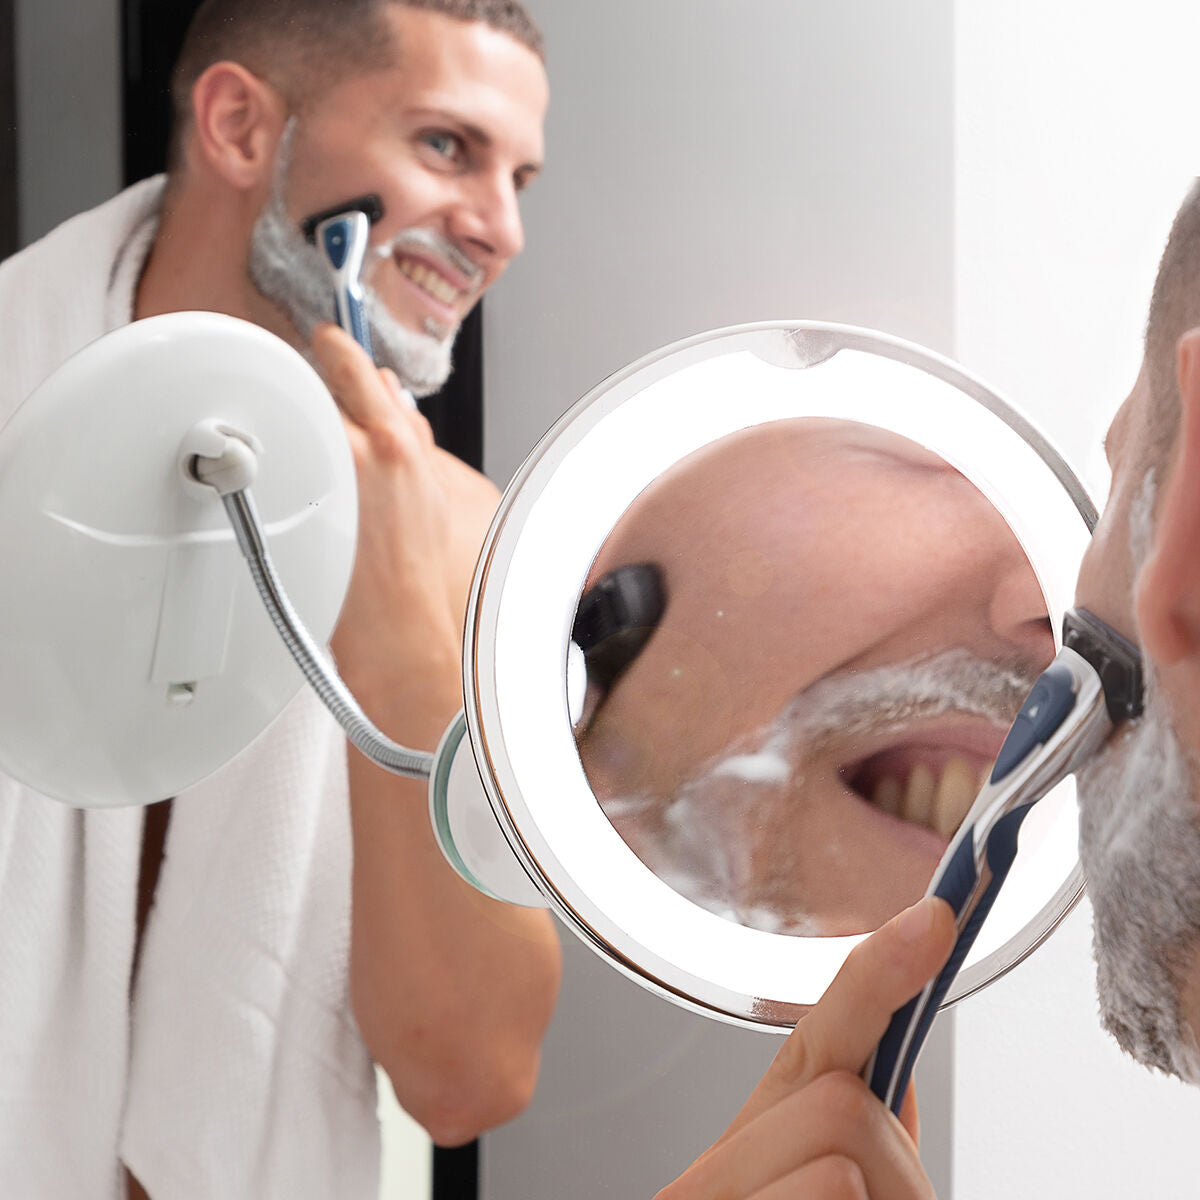 LED magnifying mirror with Flexible Arm and Suction Pad Mizoom InnovaGoods